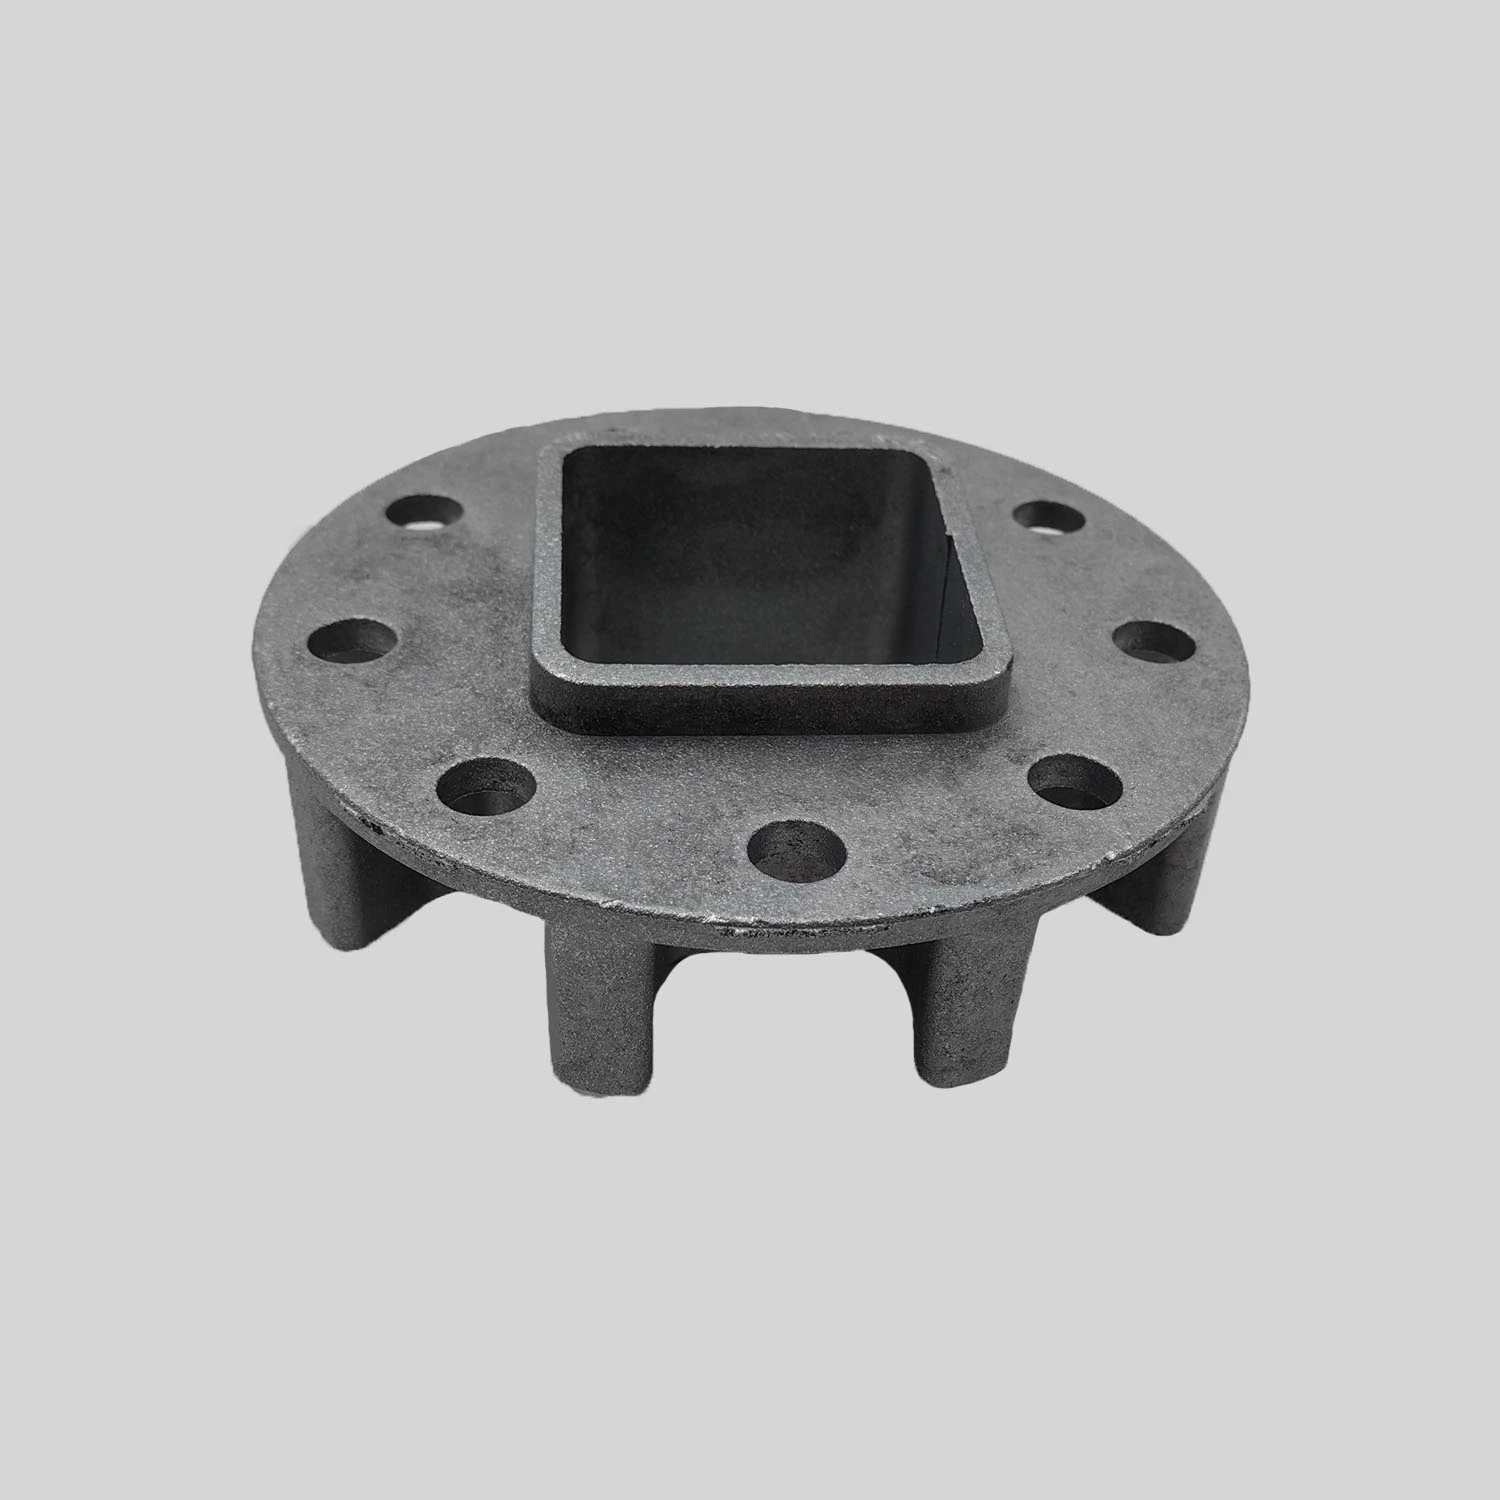 Custom Die Casting Mold Aluminum Die Casting Parts Products Made in China Factory OEM Low Price